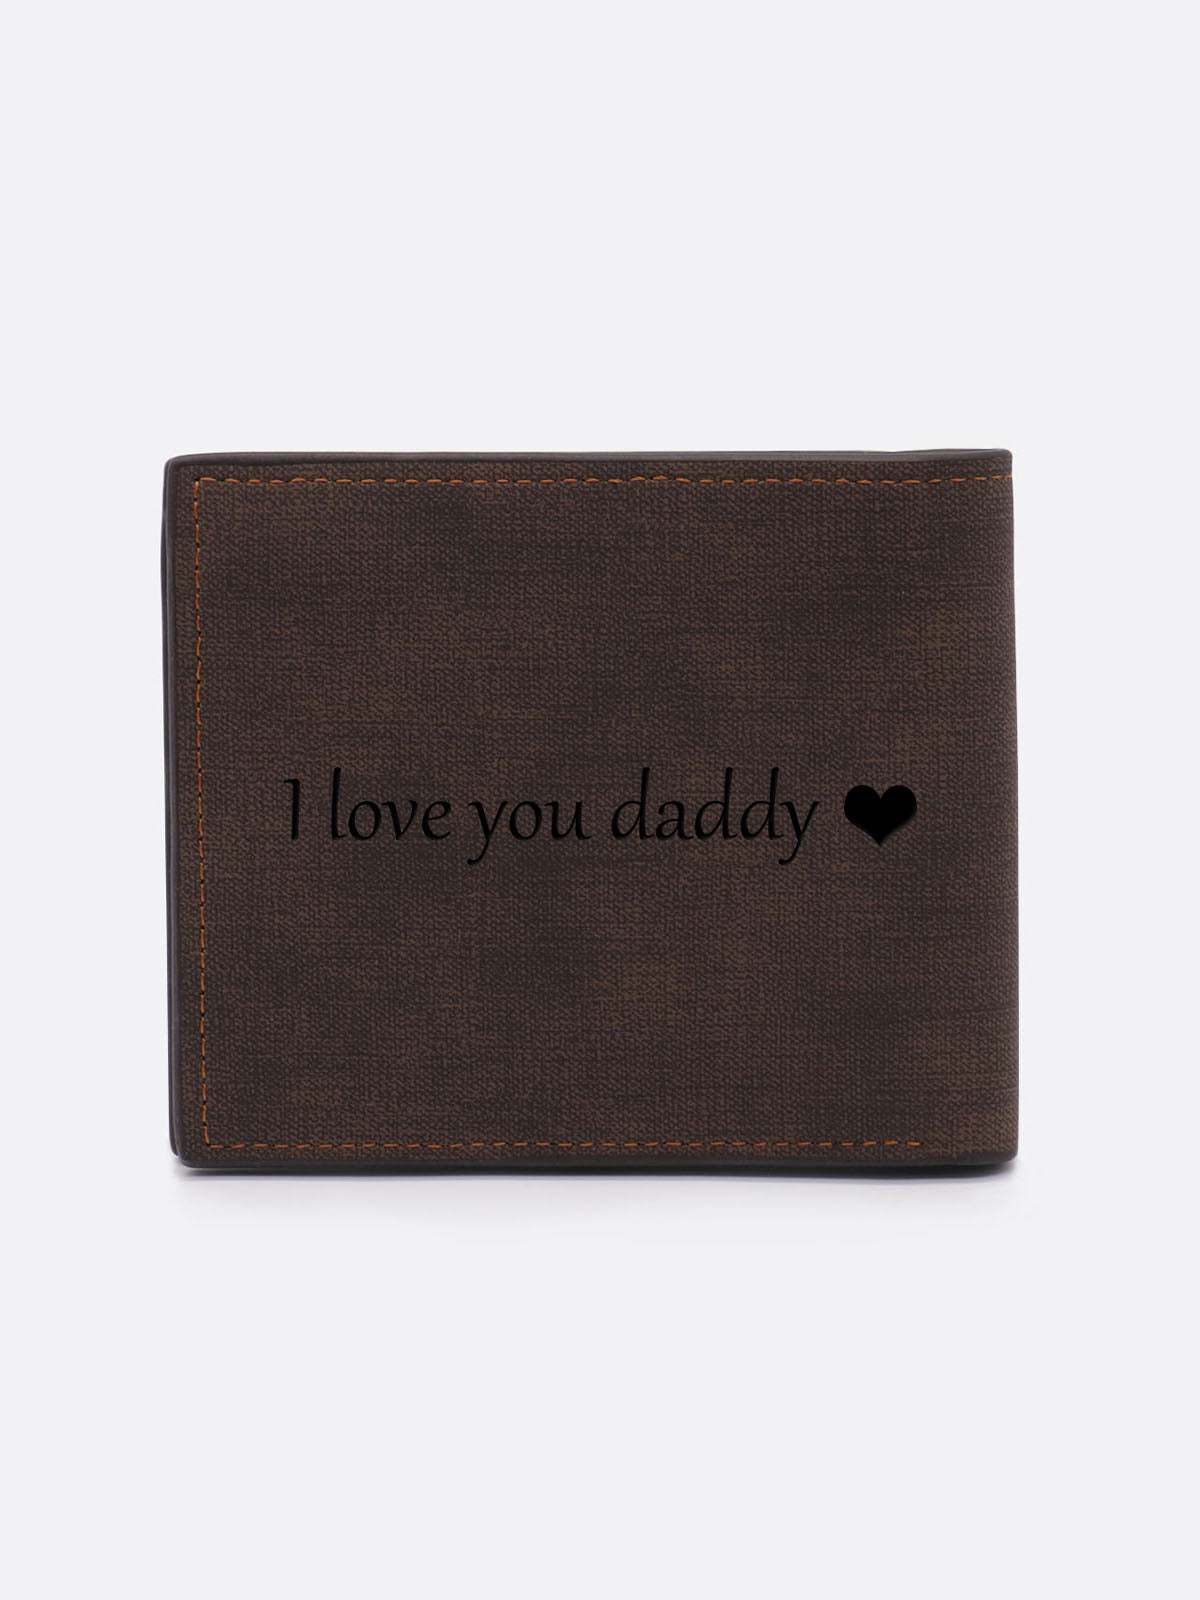 Personalized Photo Engraving Leather  Wallet In Dark Brown